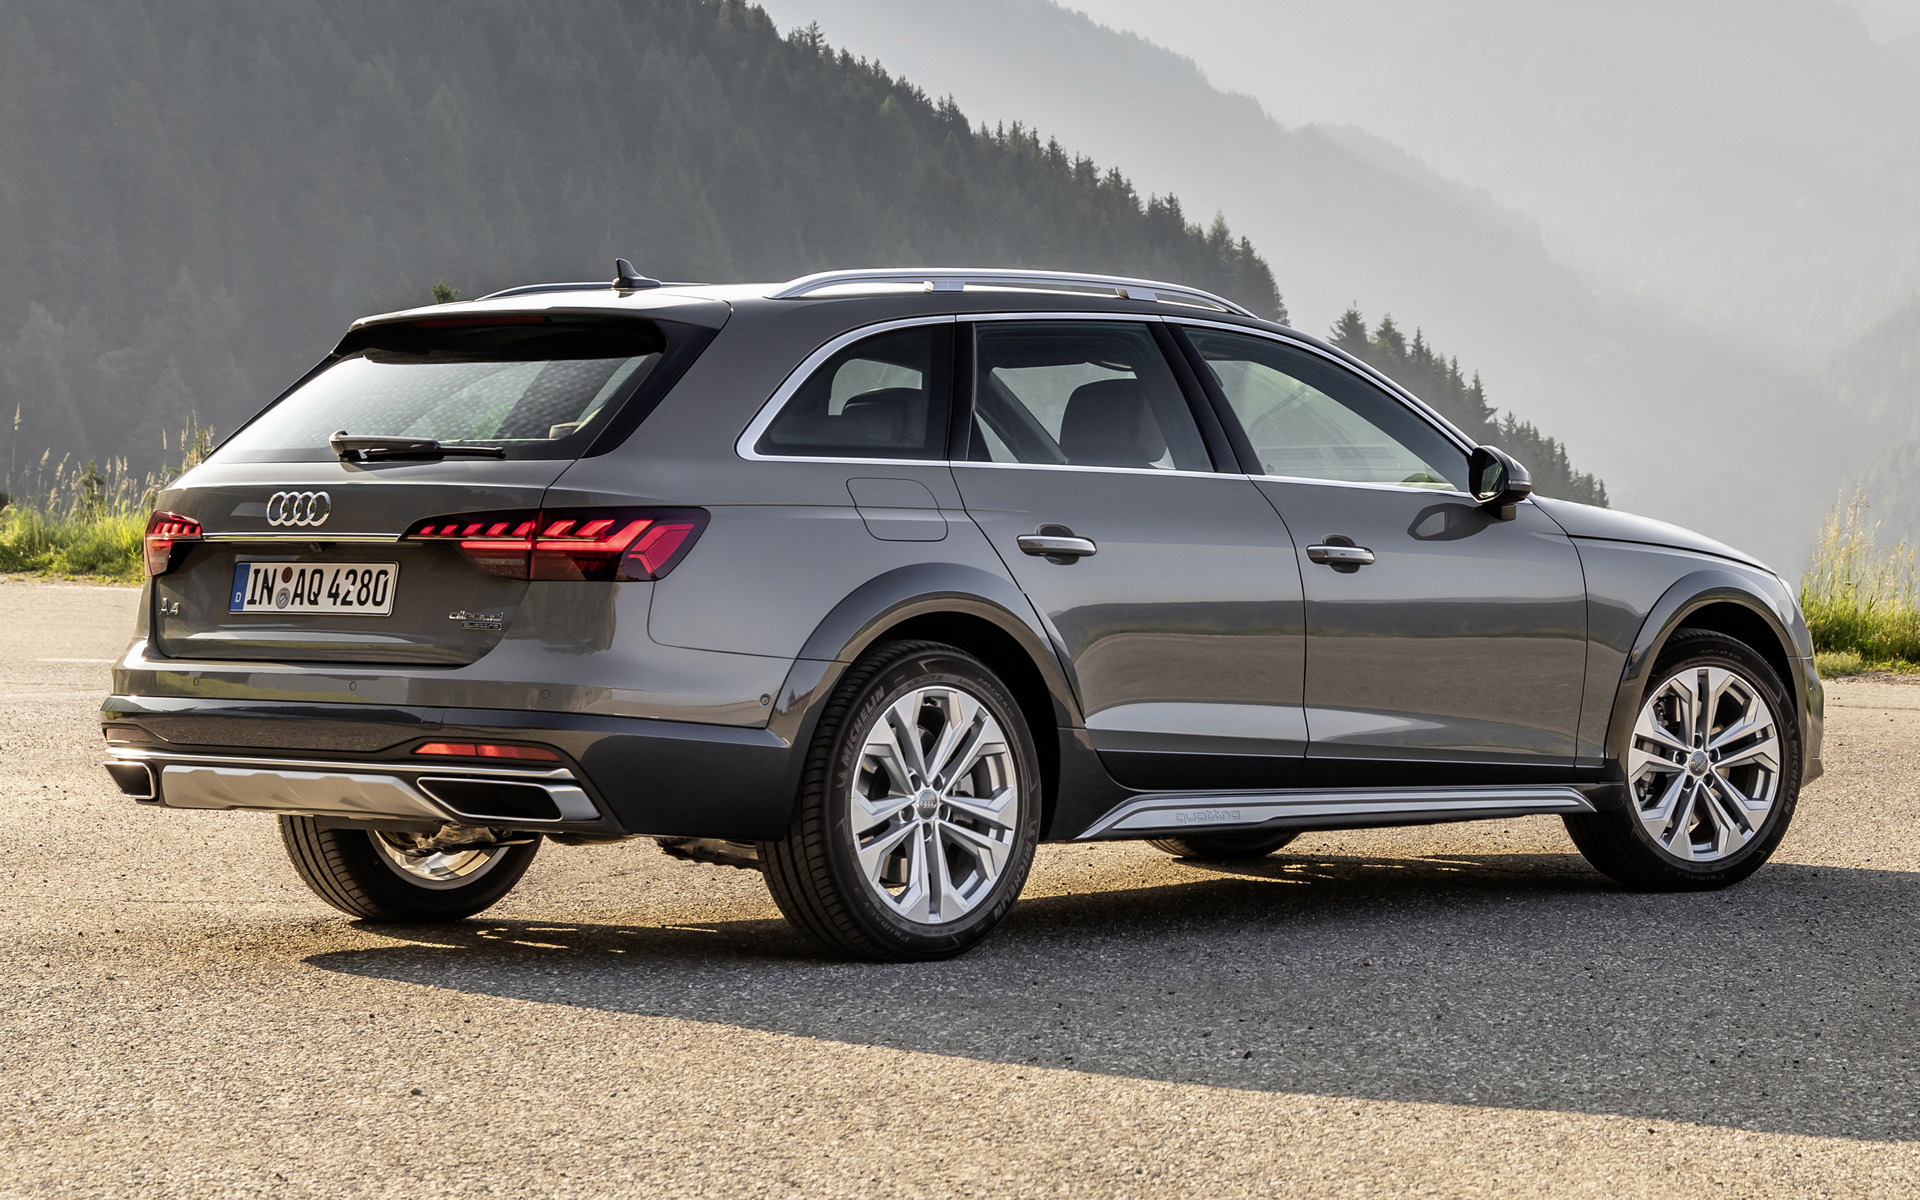 2019 Audi A4 Allroad - Wallpapers and HD Images | Car Pixel